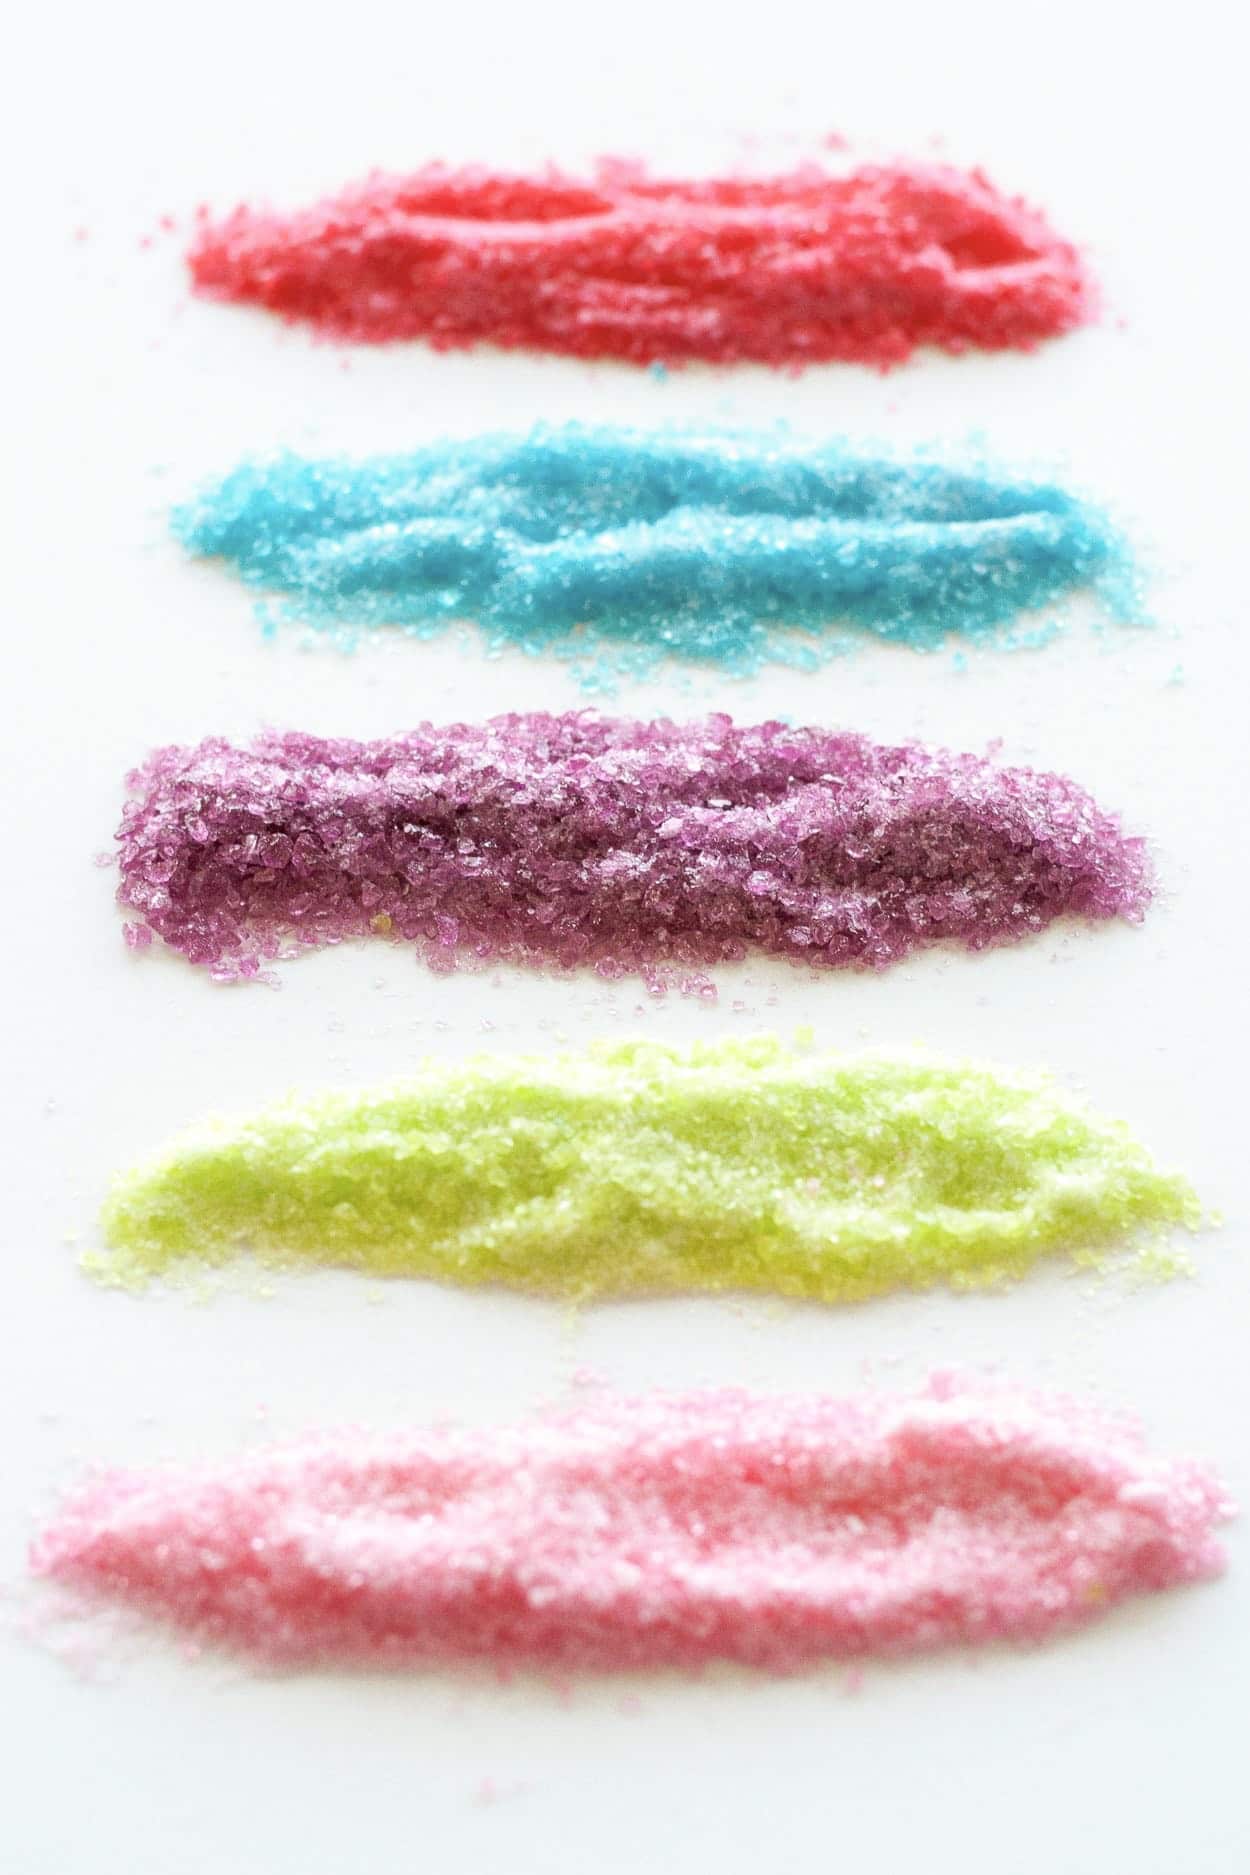 Crushed candy in different colors